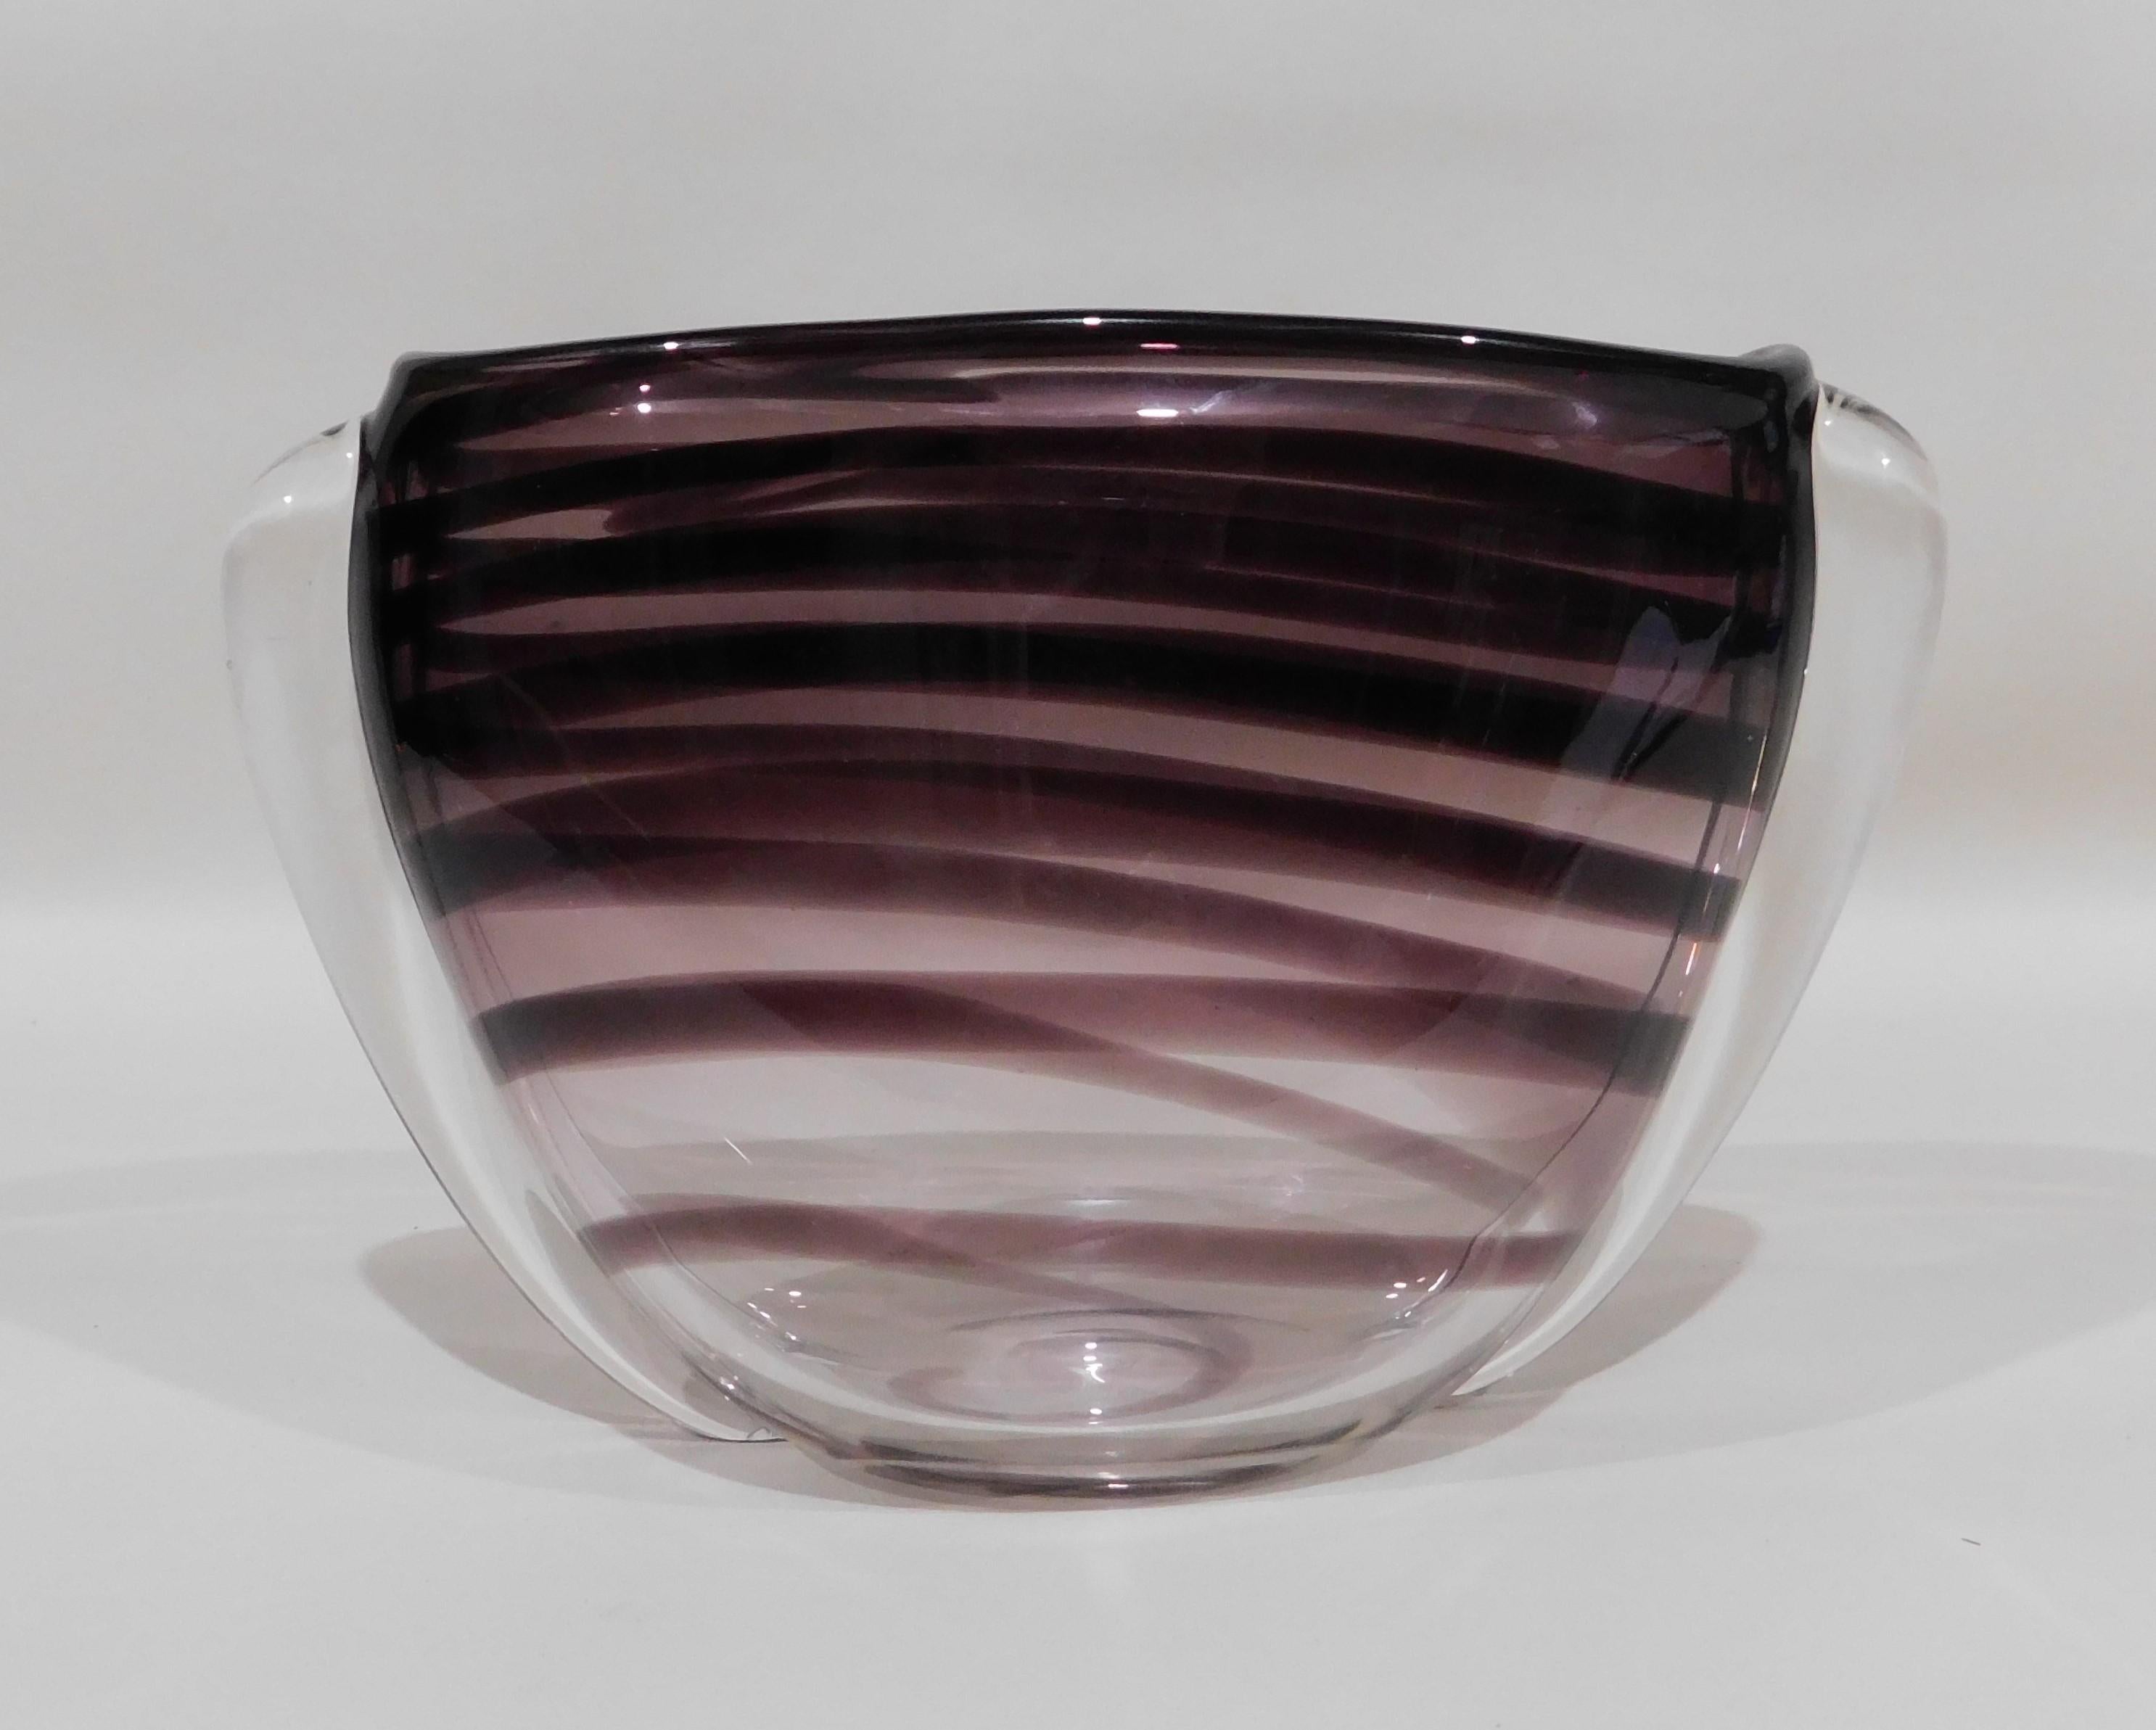 Mid-Century Modern art glass vase unica (unique) design by Floris Meydam and executed by Glasfabriek Leerdam/The Netherlands, circa 1960, signed on the bottom.